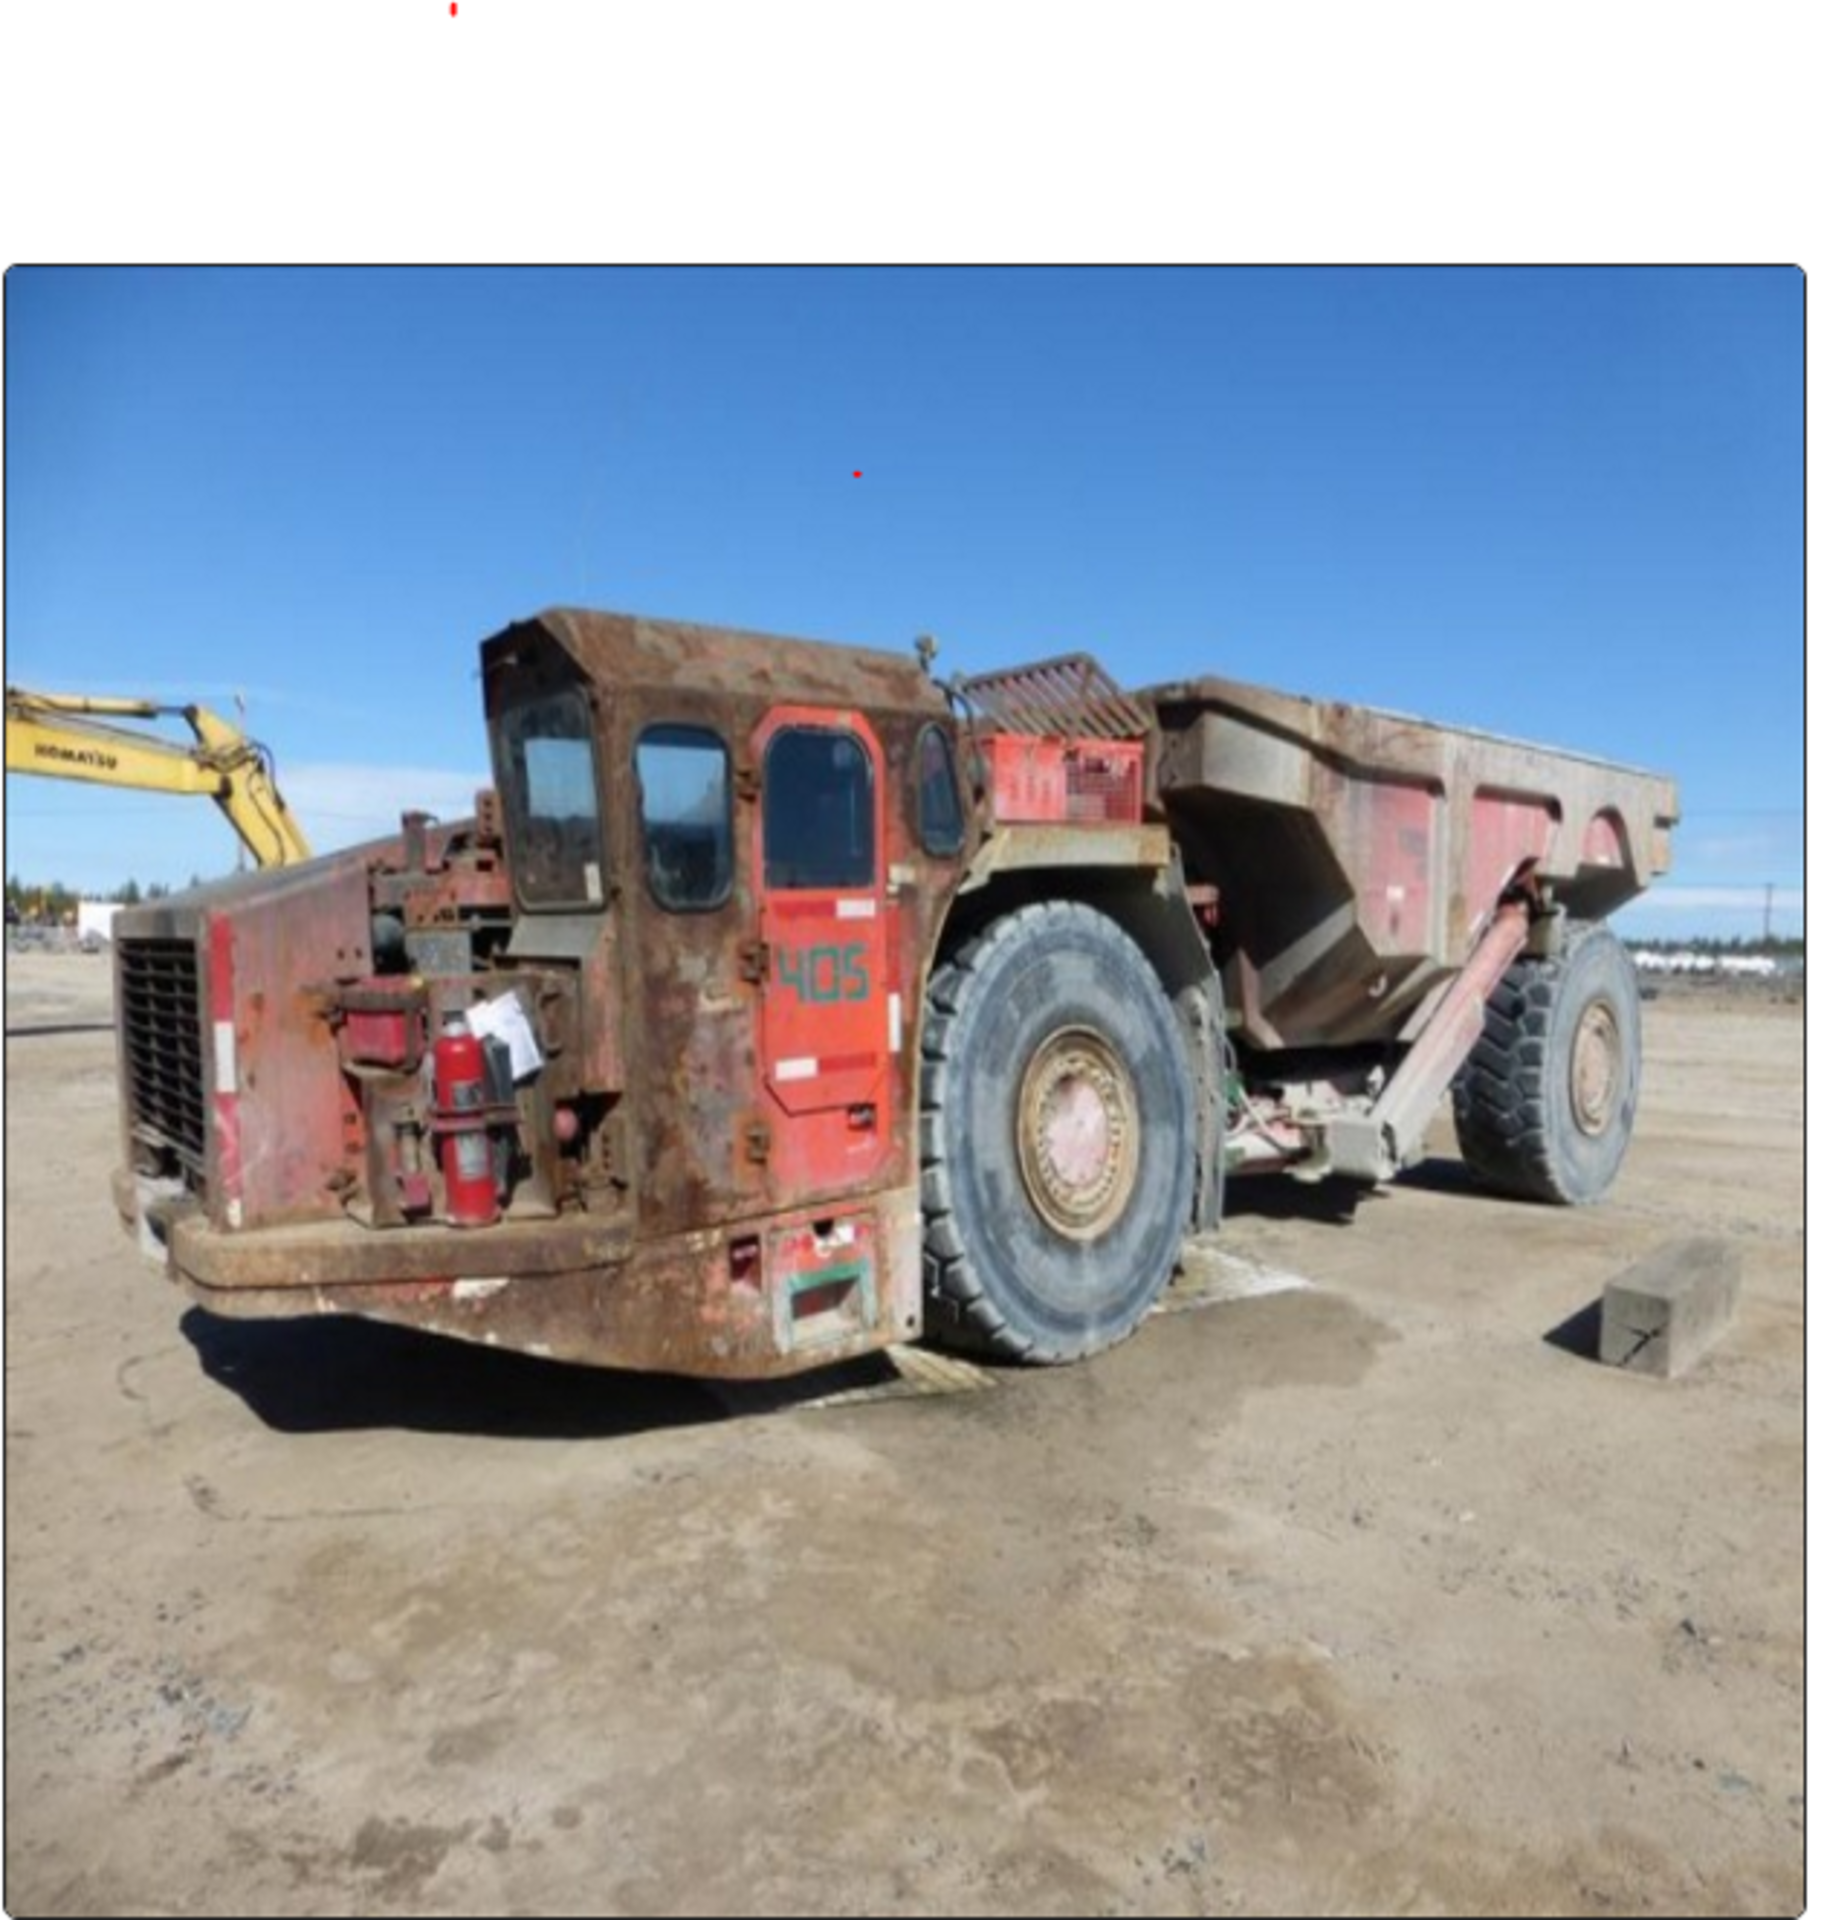 Full Catalog Coming Soon! Day 2 - DE BEERS SNAP LAKE MINE SURPLUS ASSETS AUCTION - Image 4 of 6